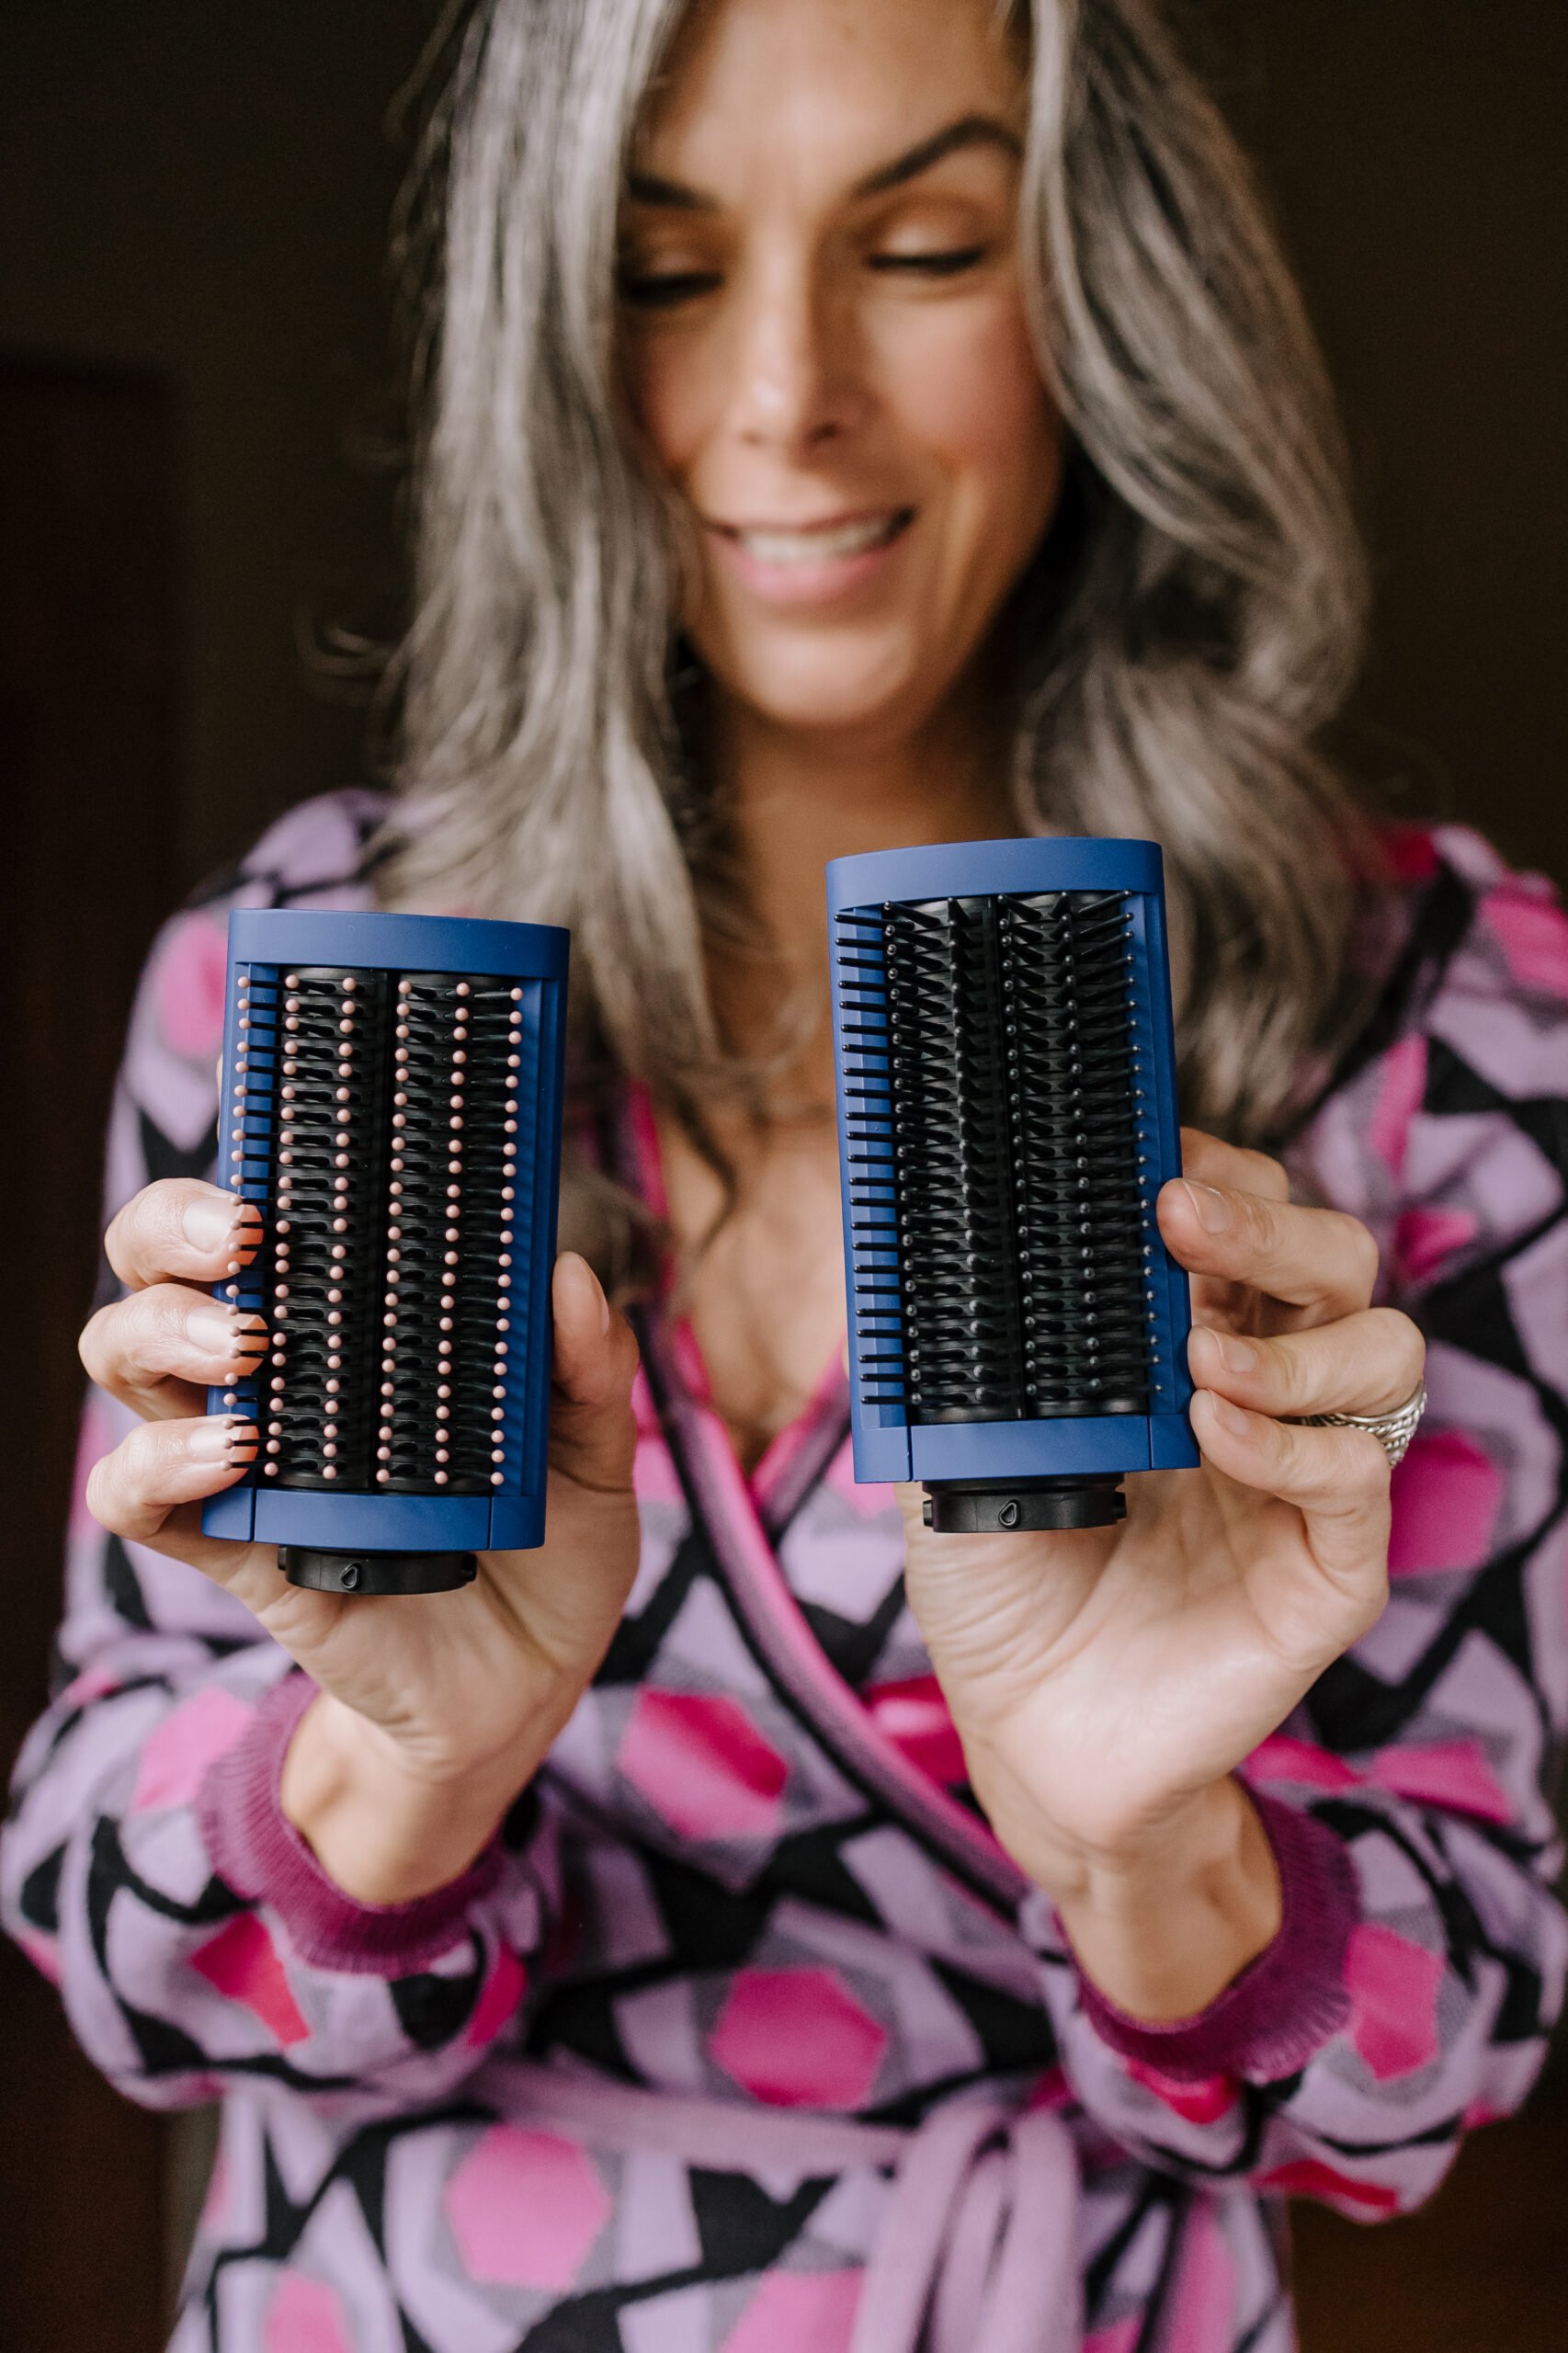 A woman with long gray hair holds up the Dyson Airwrap smoothing brushes.